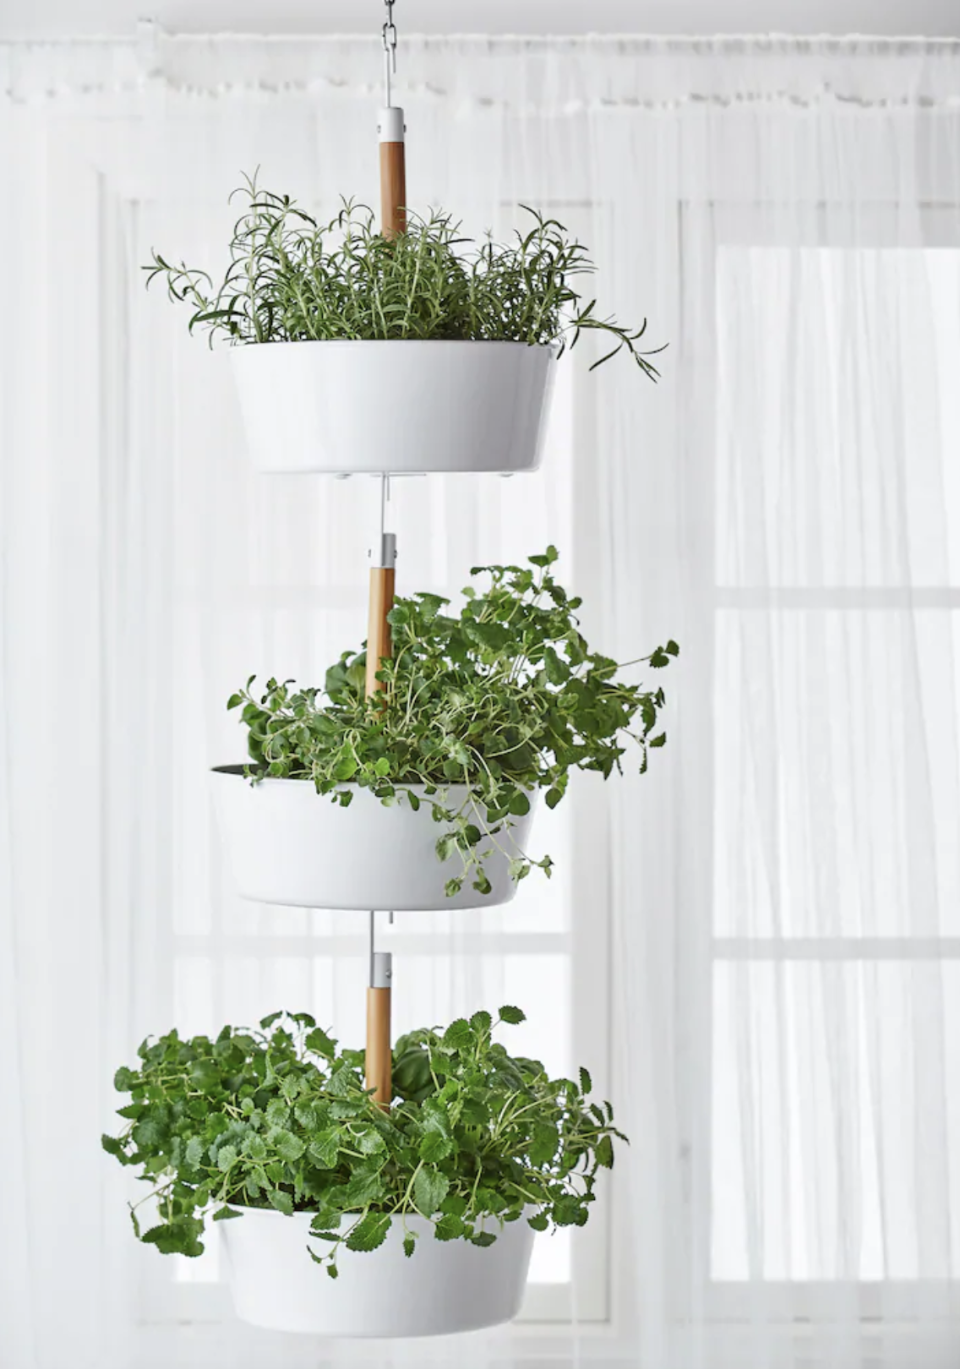 <p> Vertical and indoor gardening go hand in hand so don&apos;t feel limited to just using your outdoor space. Grow herbs upwards for a cute and tasty display no matter where you hang this little masterpiece. </p>